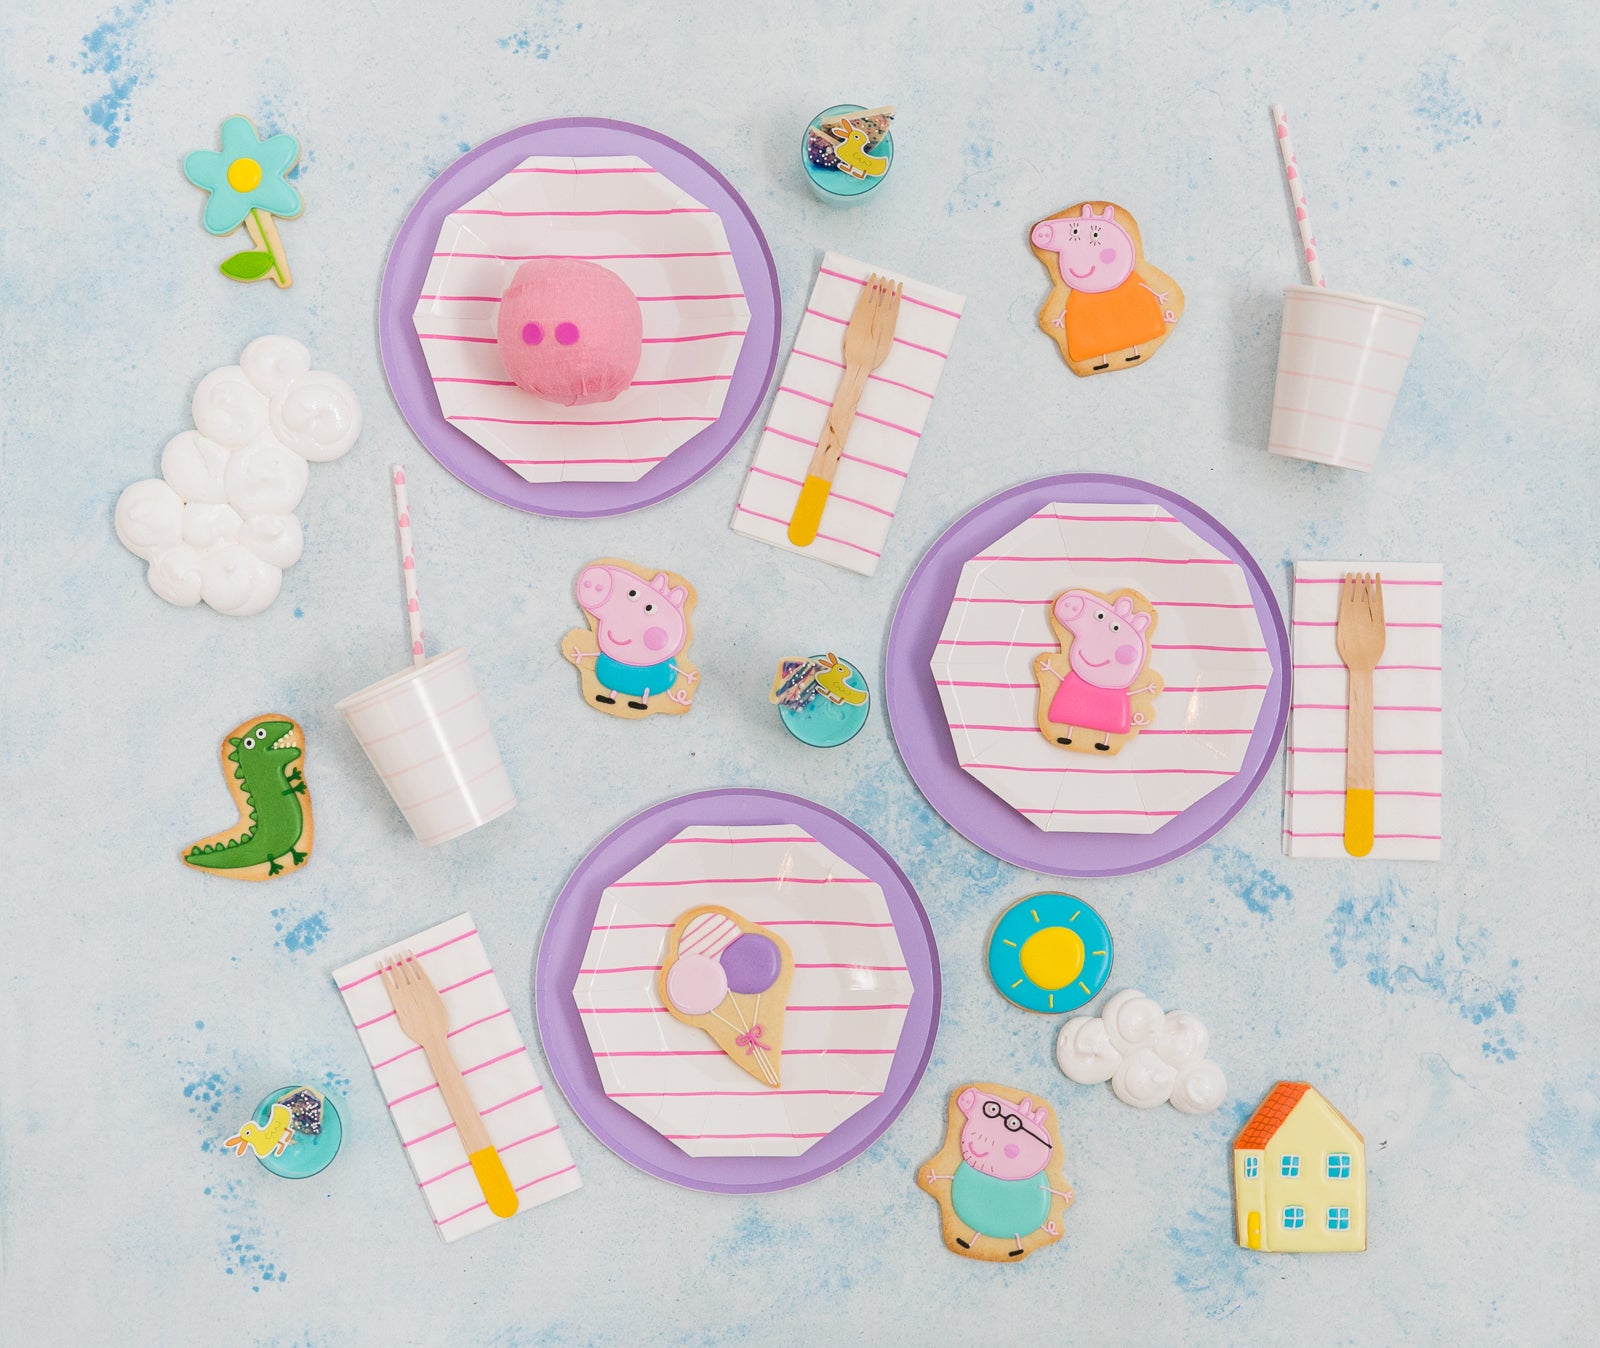 Peppa Pig party supplies.